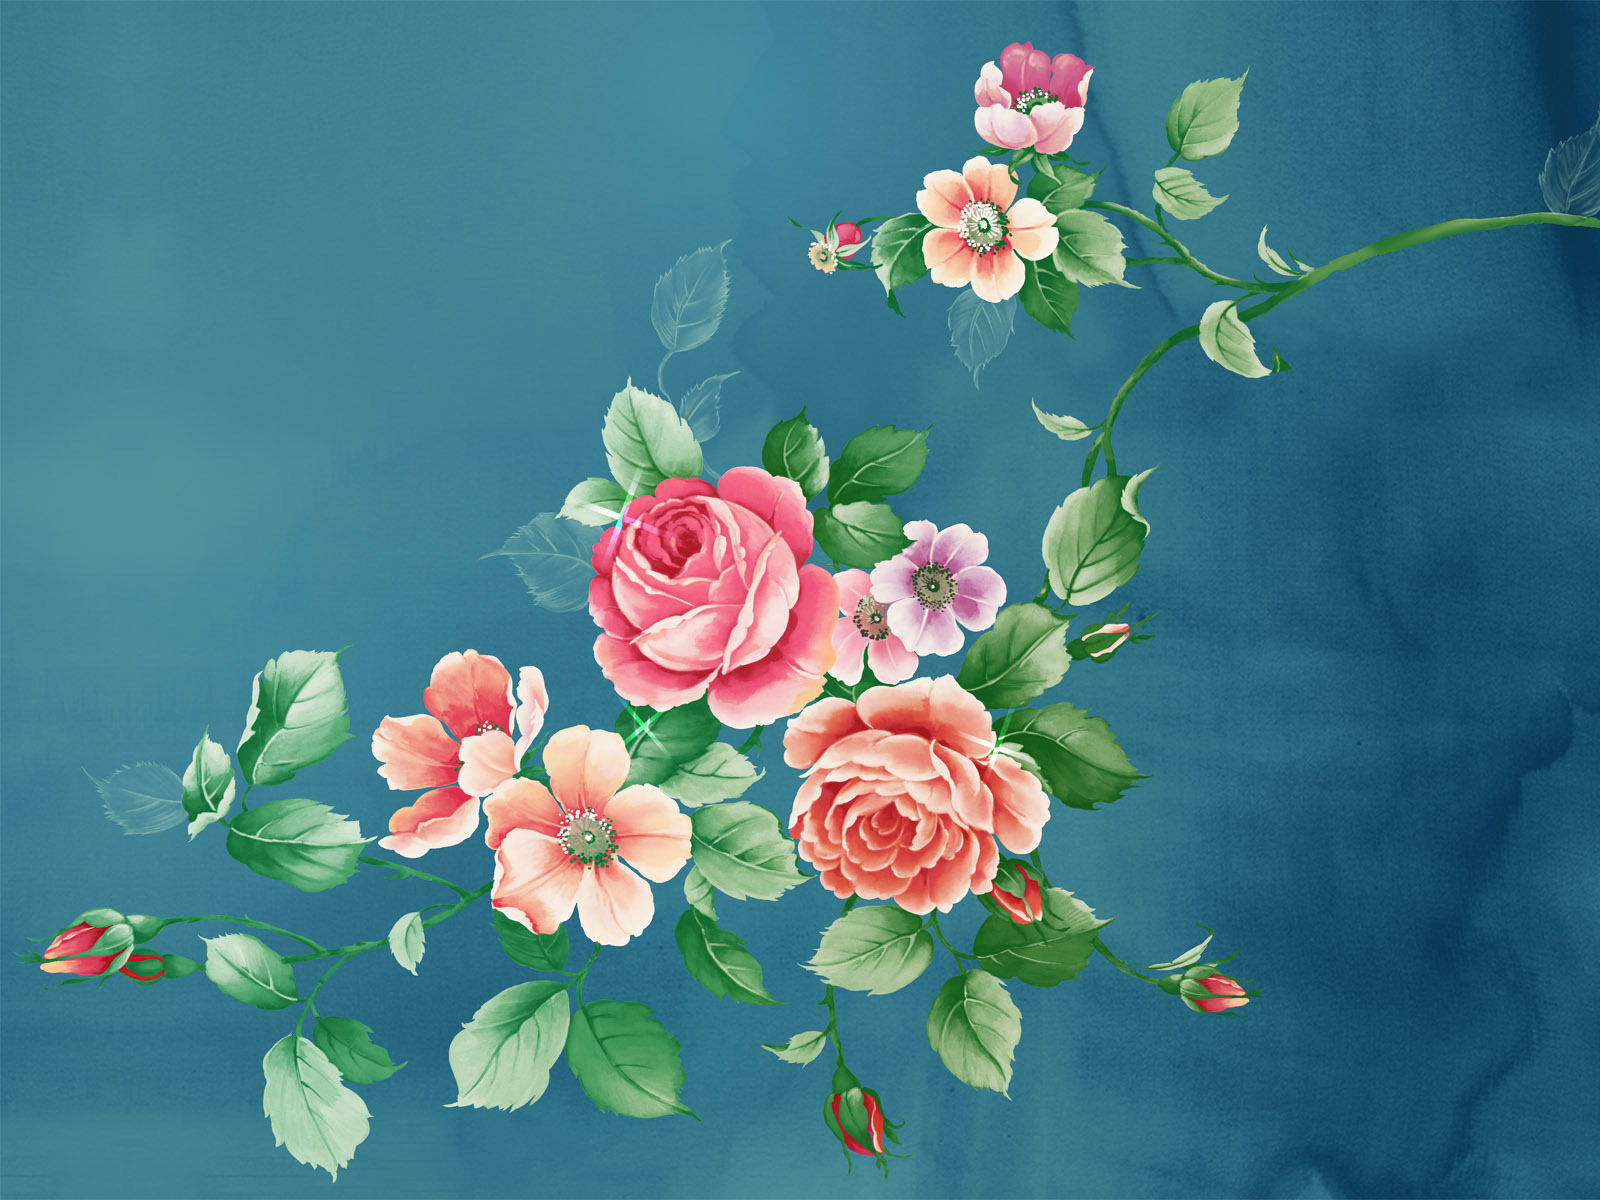 plants, pictures, roses, flowers, turquoise 4K